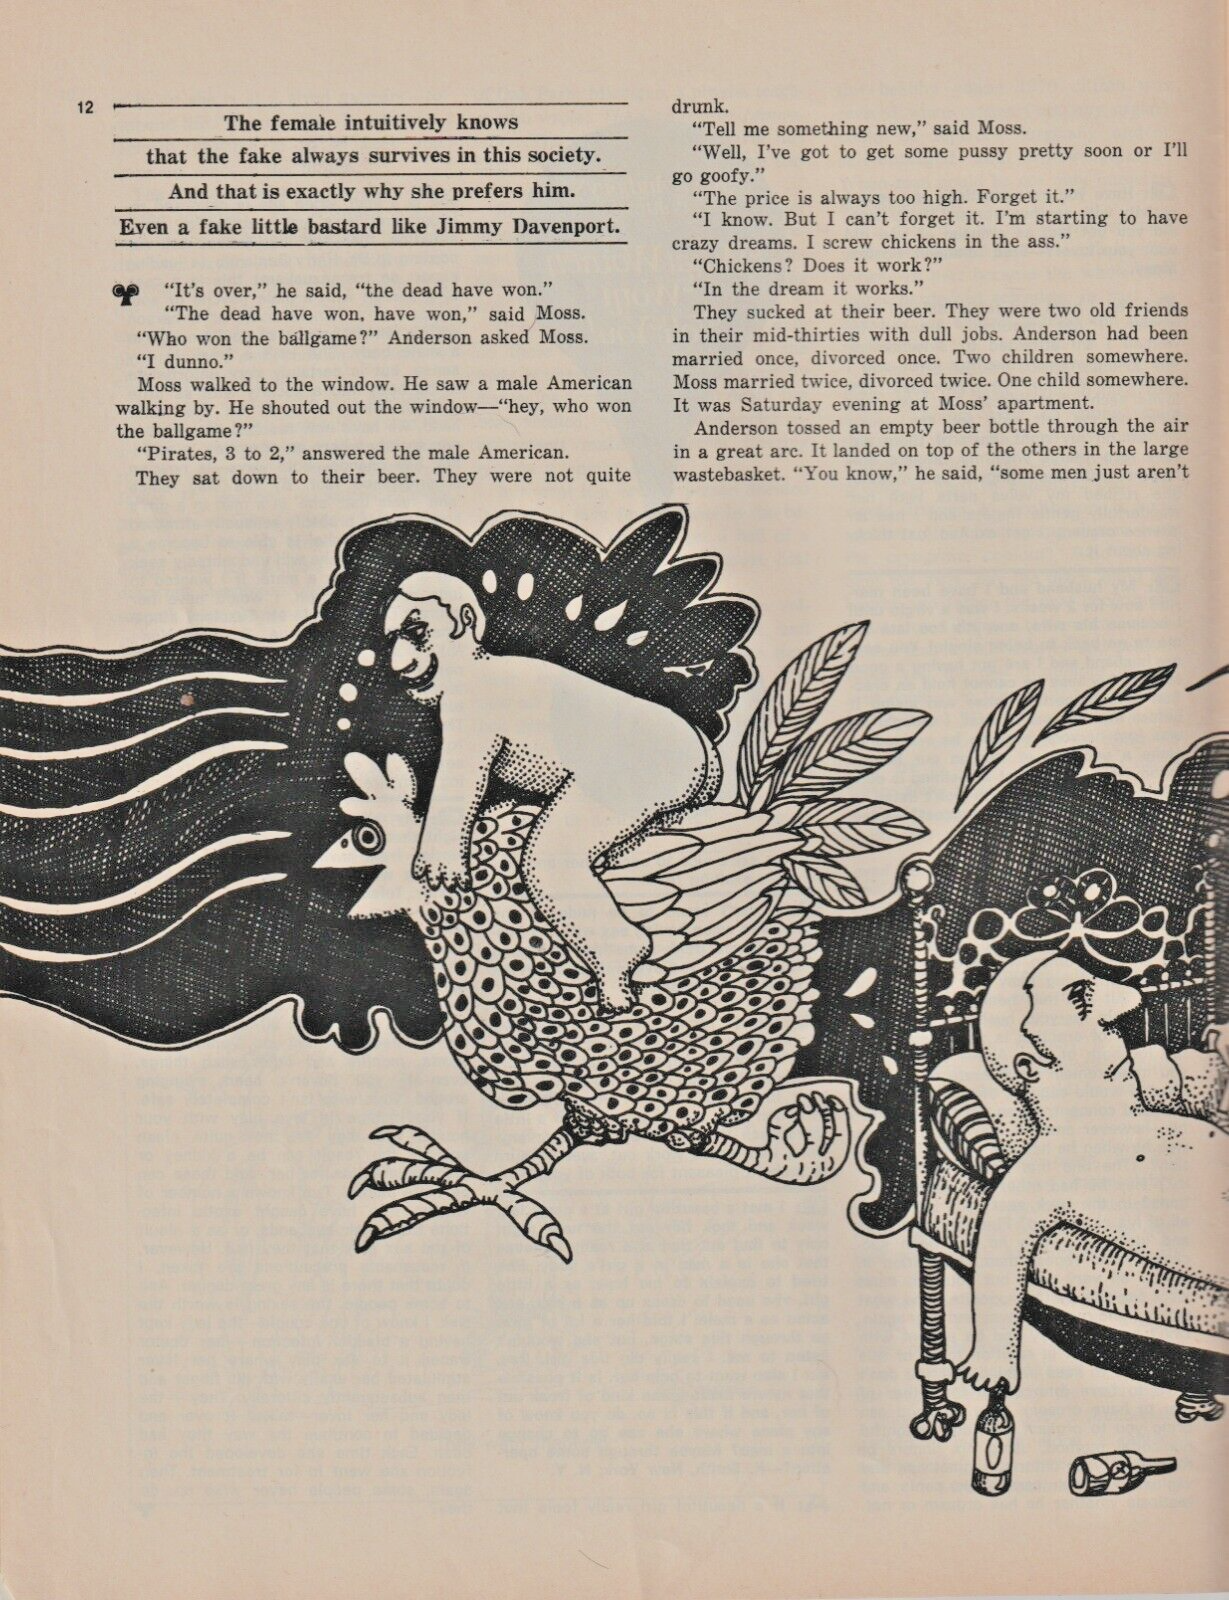 Fling May 1971 -- Short Story by Charles Bukowski: Here’s to Jimmy Davenport (1971)